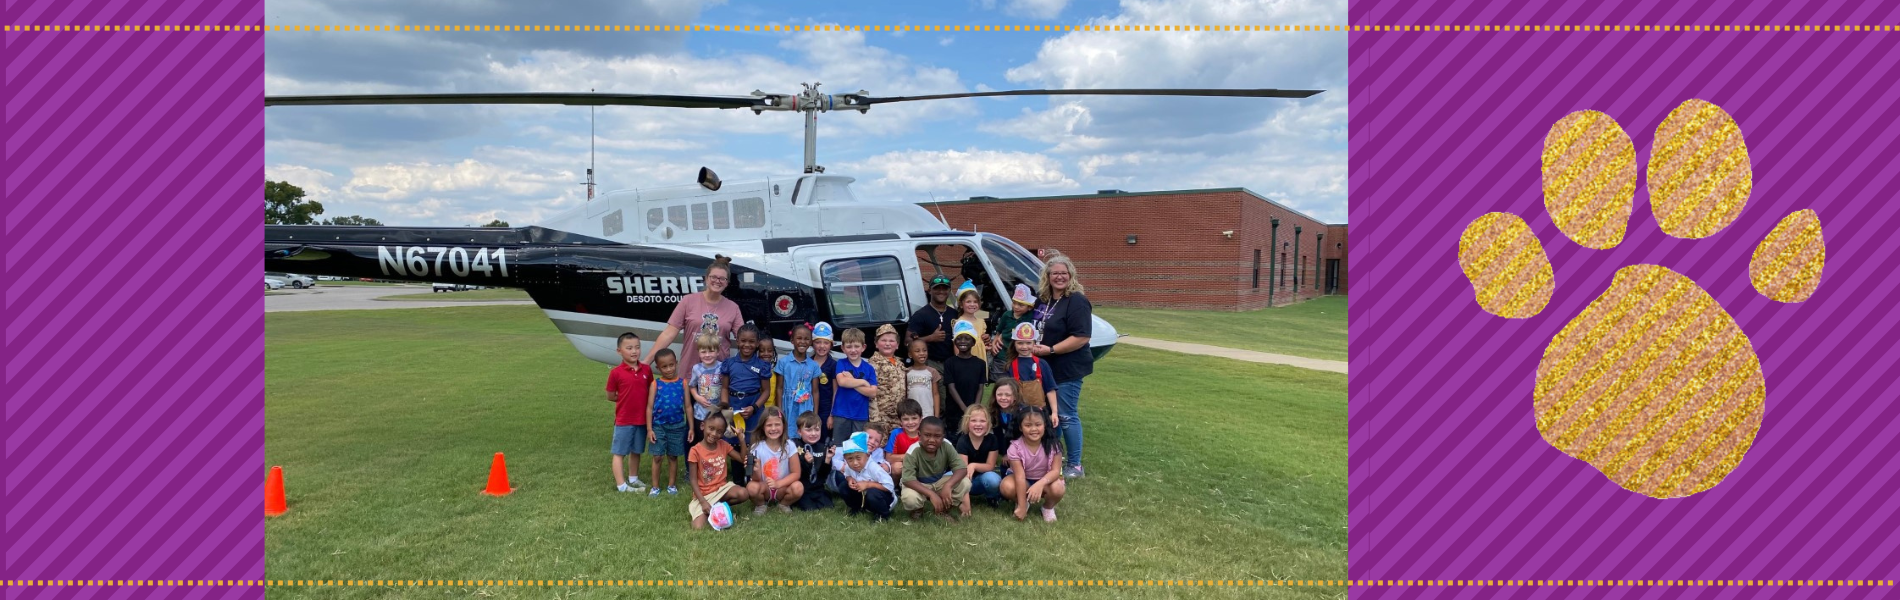 Mrs. Becca's Class Community Helper Day with the helicopter